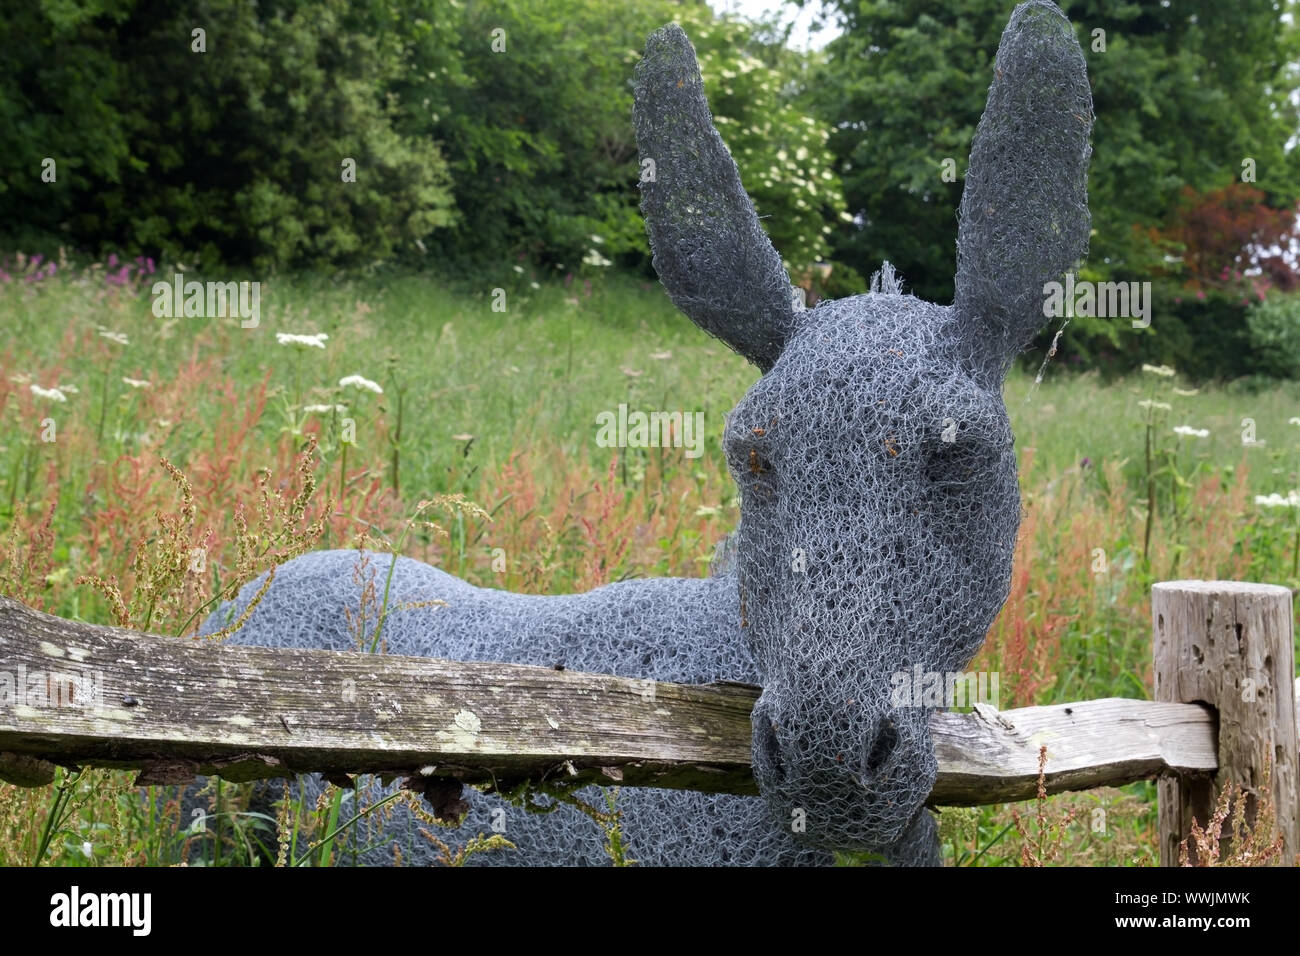 Donkey made of wire mesh in the garden Stock Photo